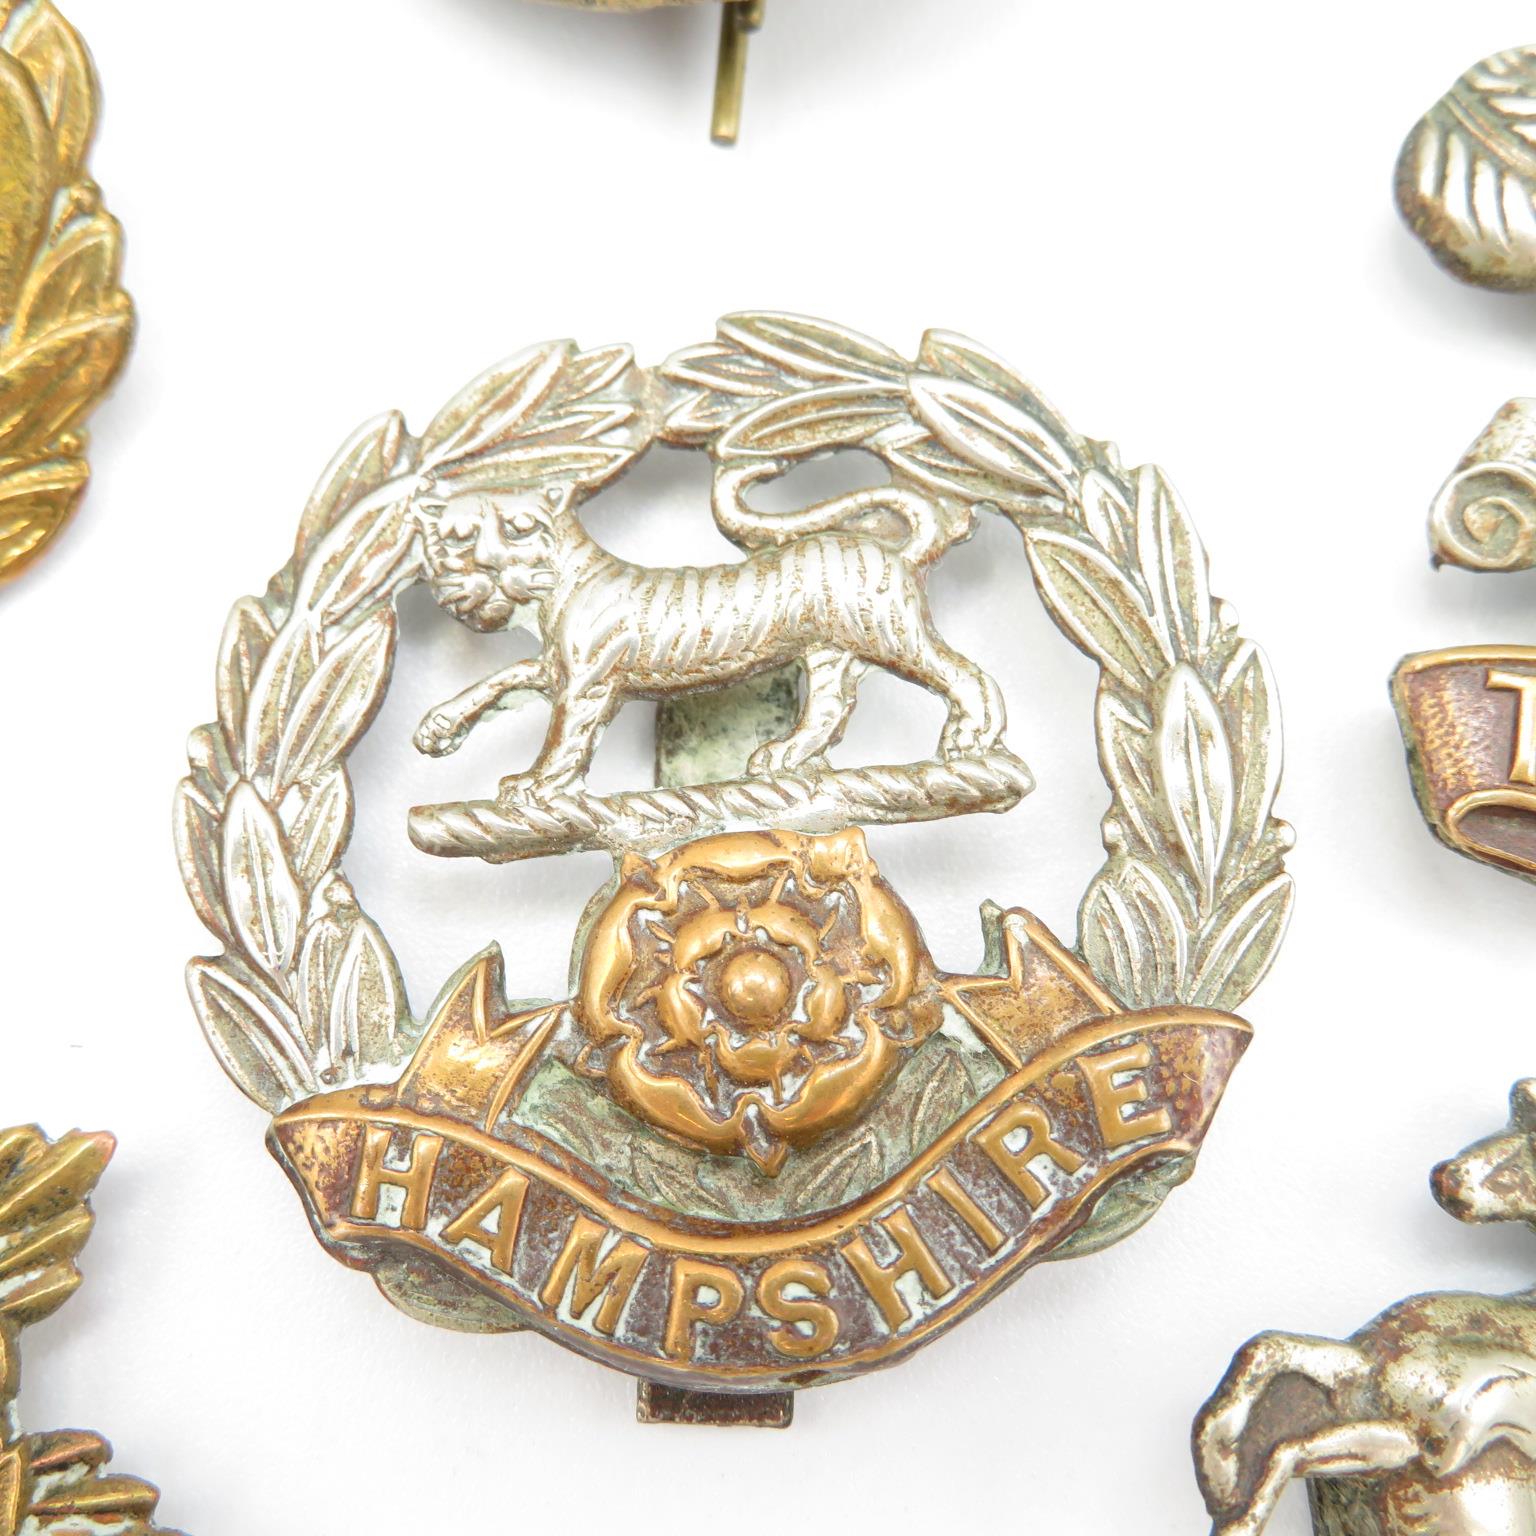 18x Military cap badges including Royal Scots Fusiliers and Lancers etc. - - Image 14 of 19